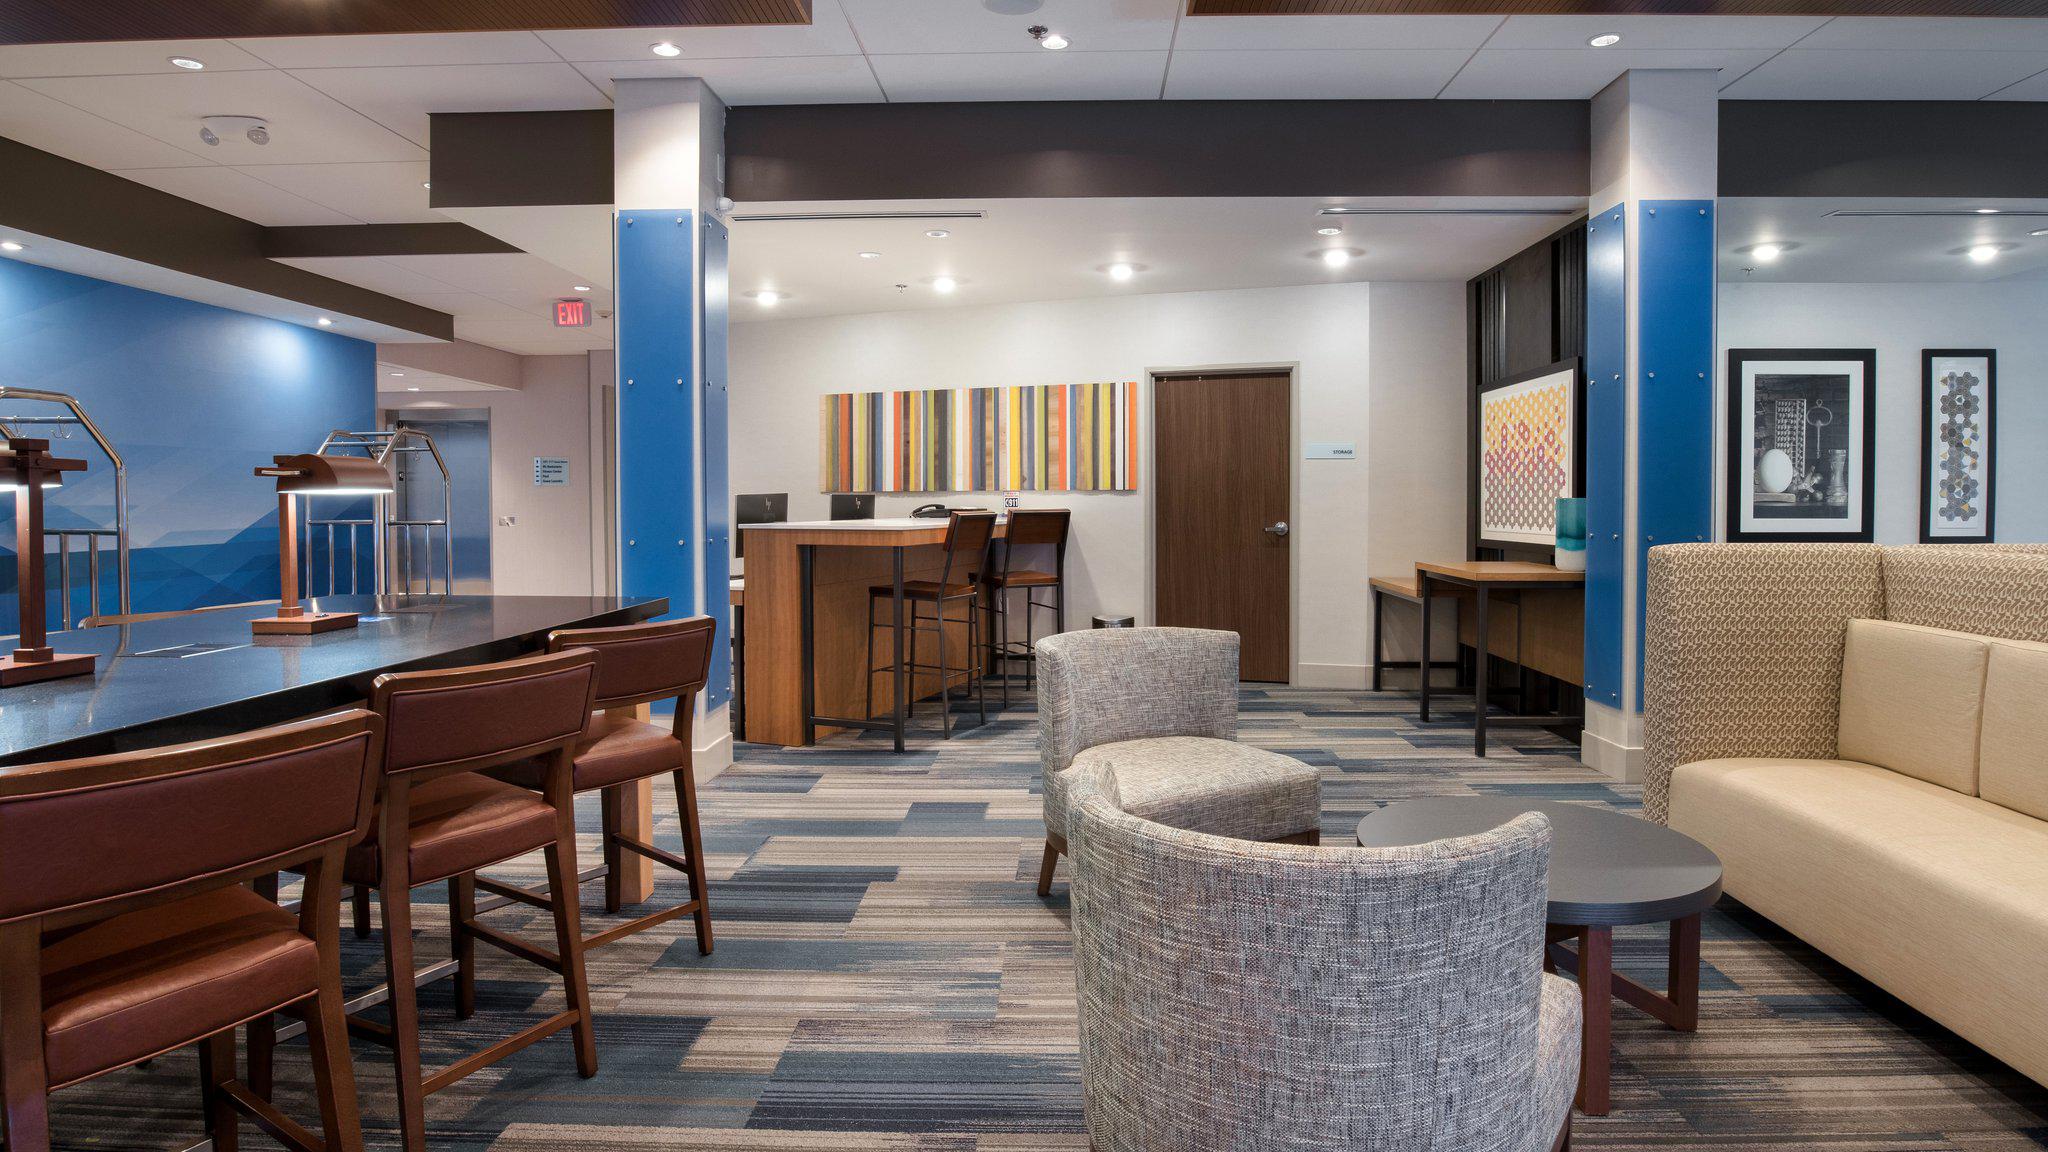 Holiday Inn Express & Suites Racine Photo